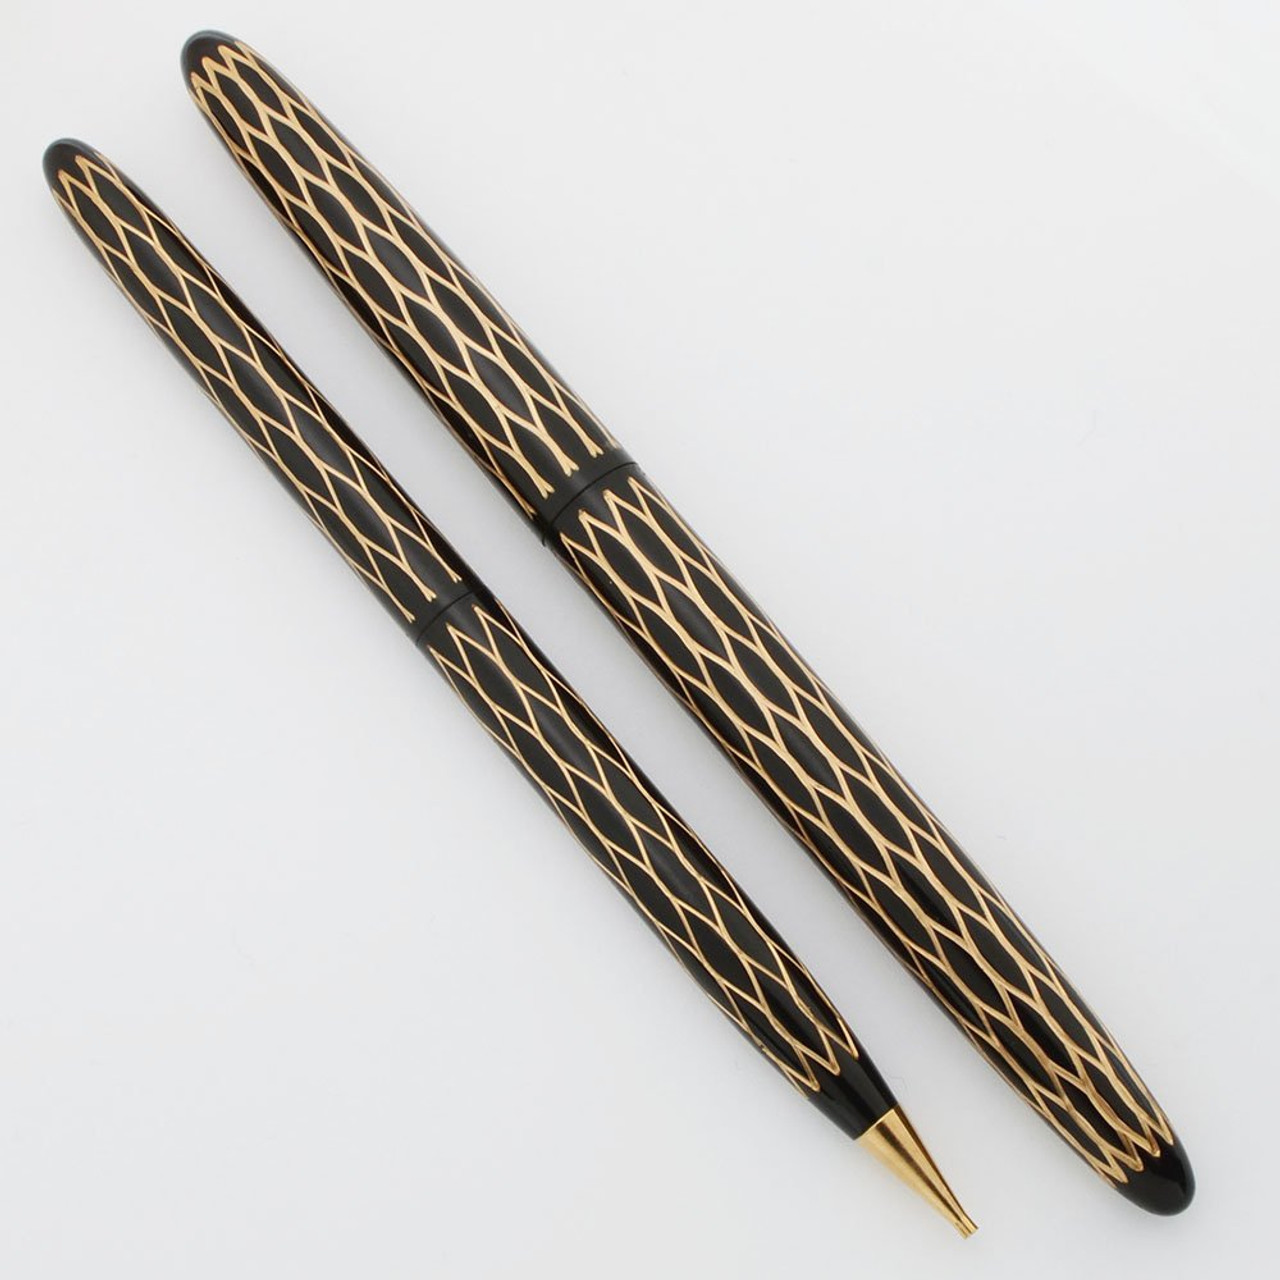 Lady Sheaffer XI Skripsert Pen Set (1959) - Black Gold Tulle Extra-Fine Steel Nib, .9mm Leads (Excellent in Box, Works Well)